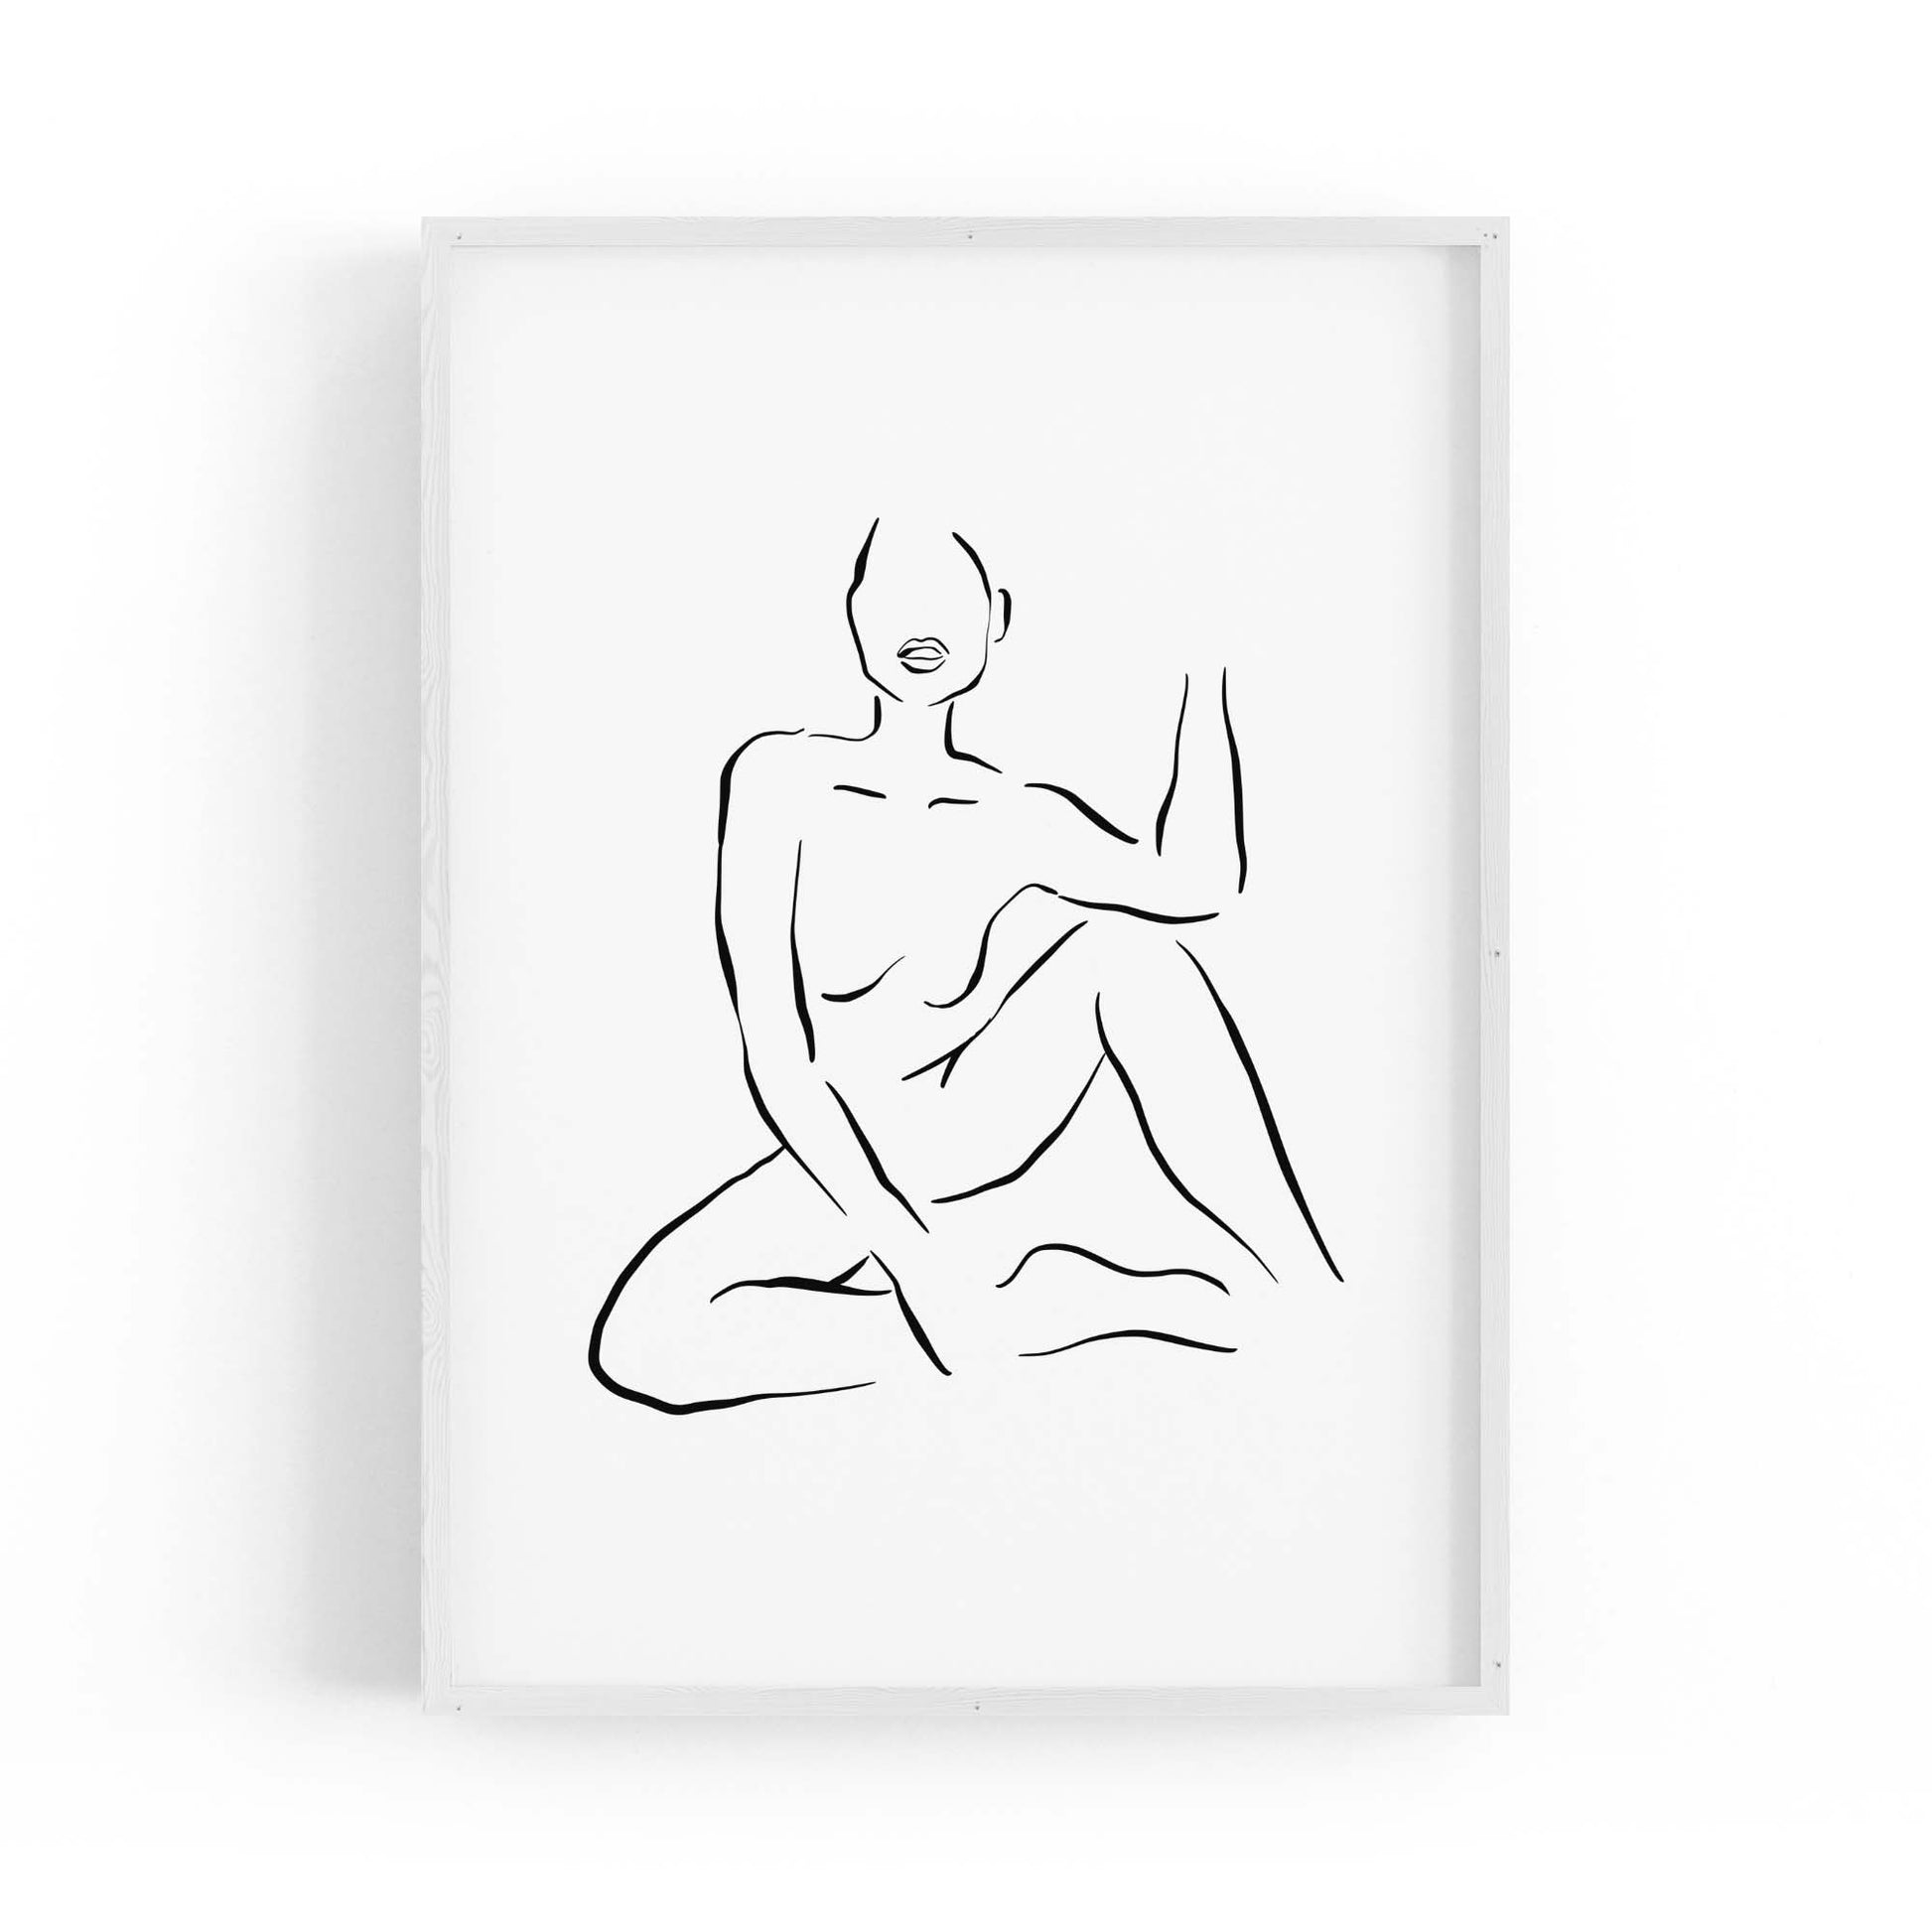 Nude Female Body Minimal Line Drawing Wall Art #2 - The Affordable Art Company